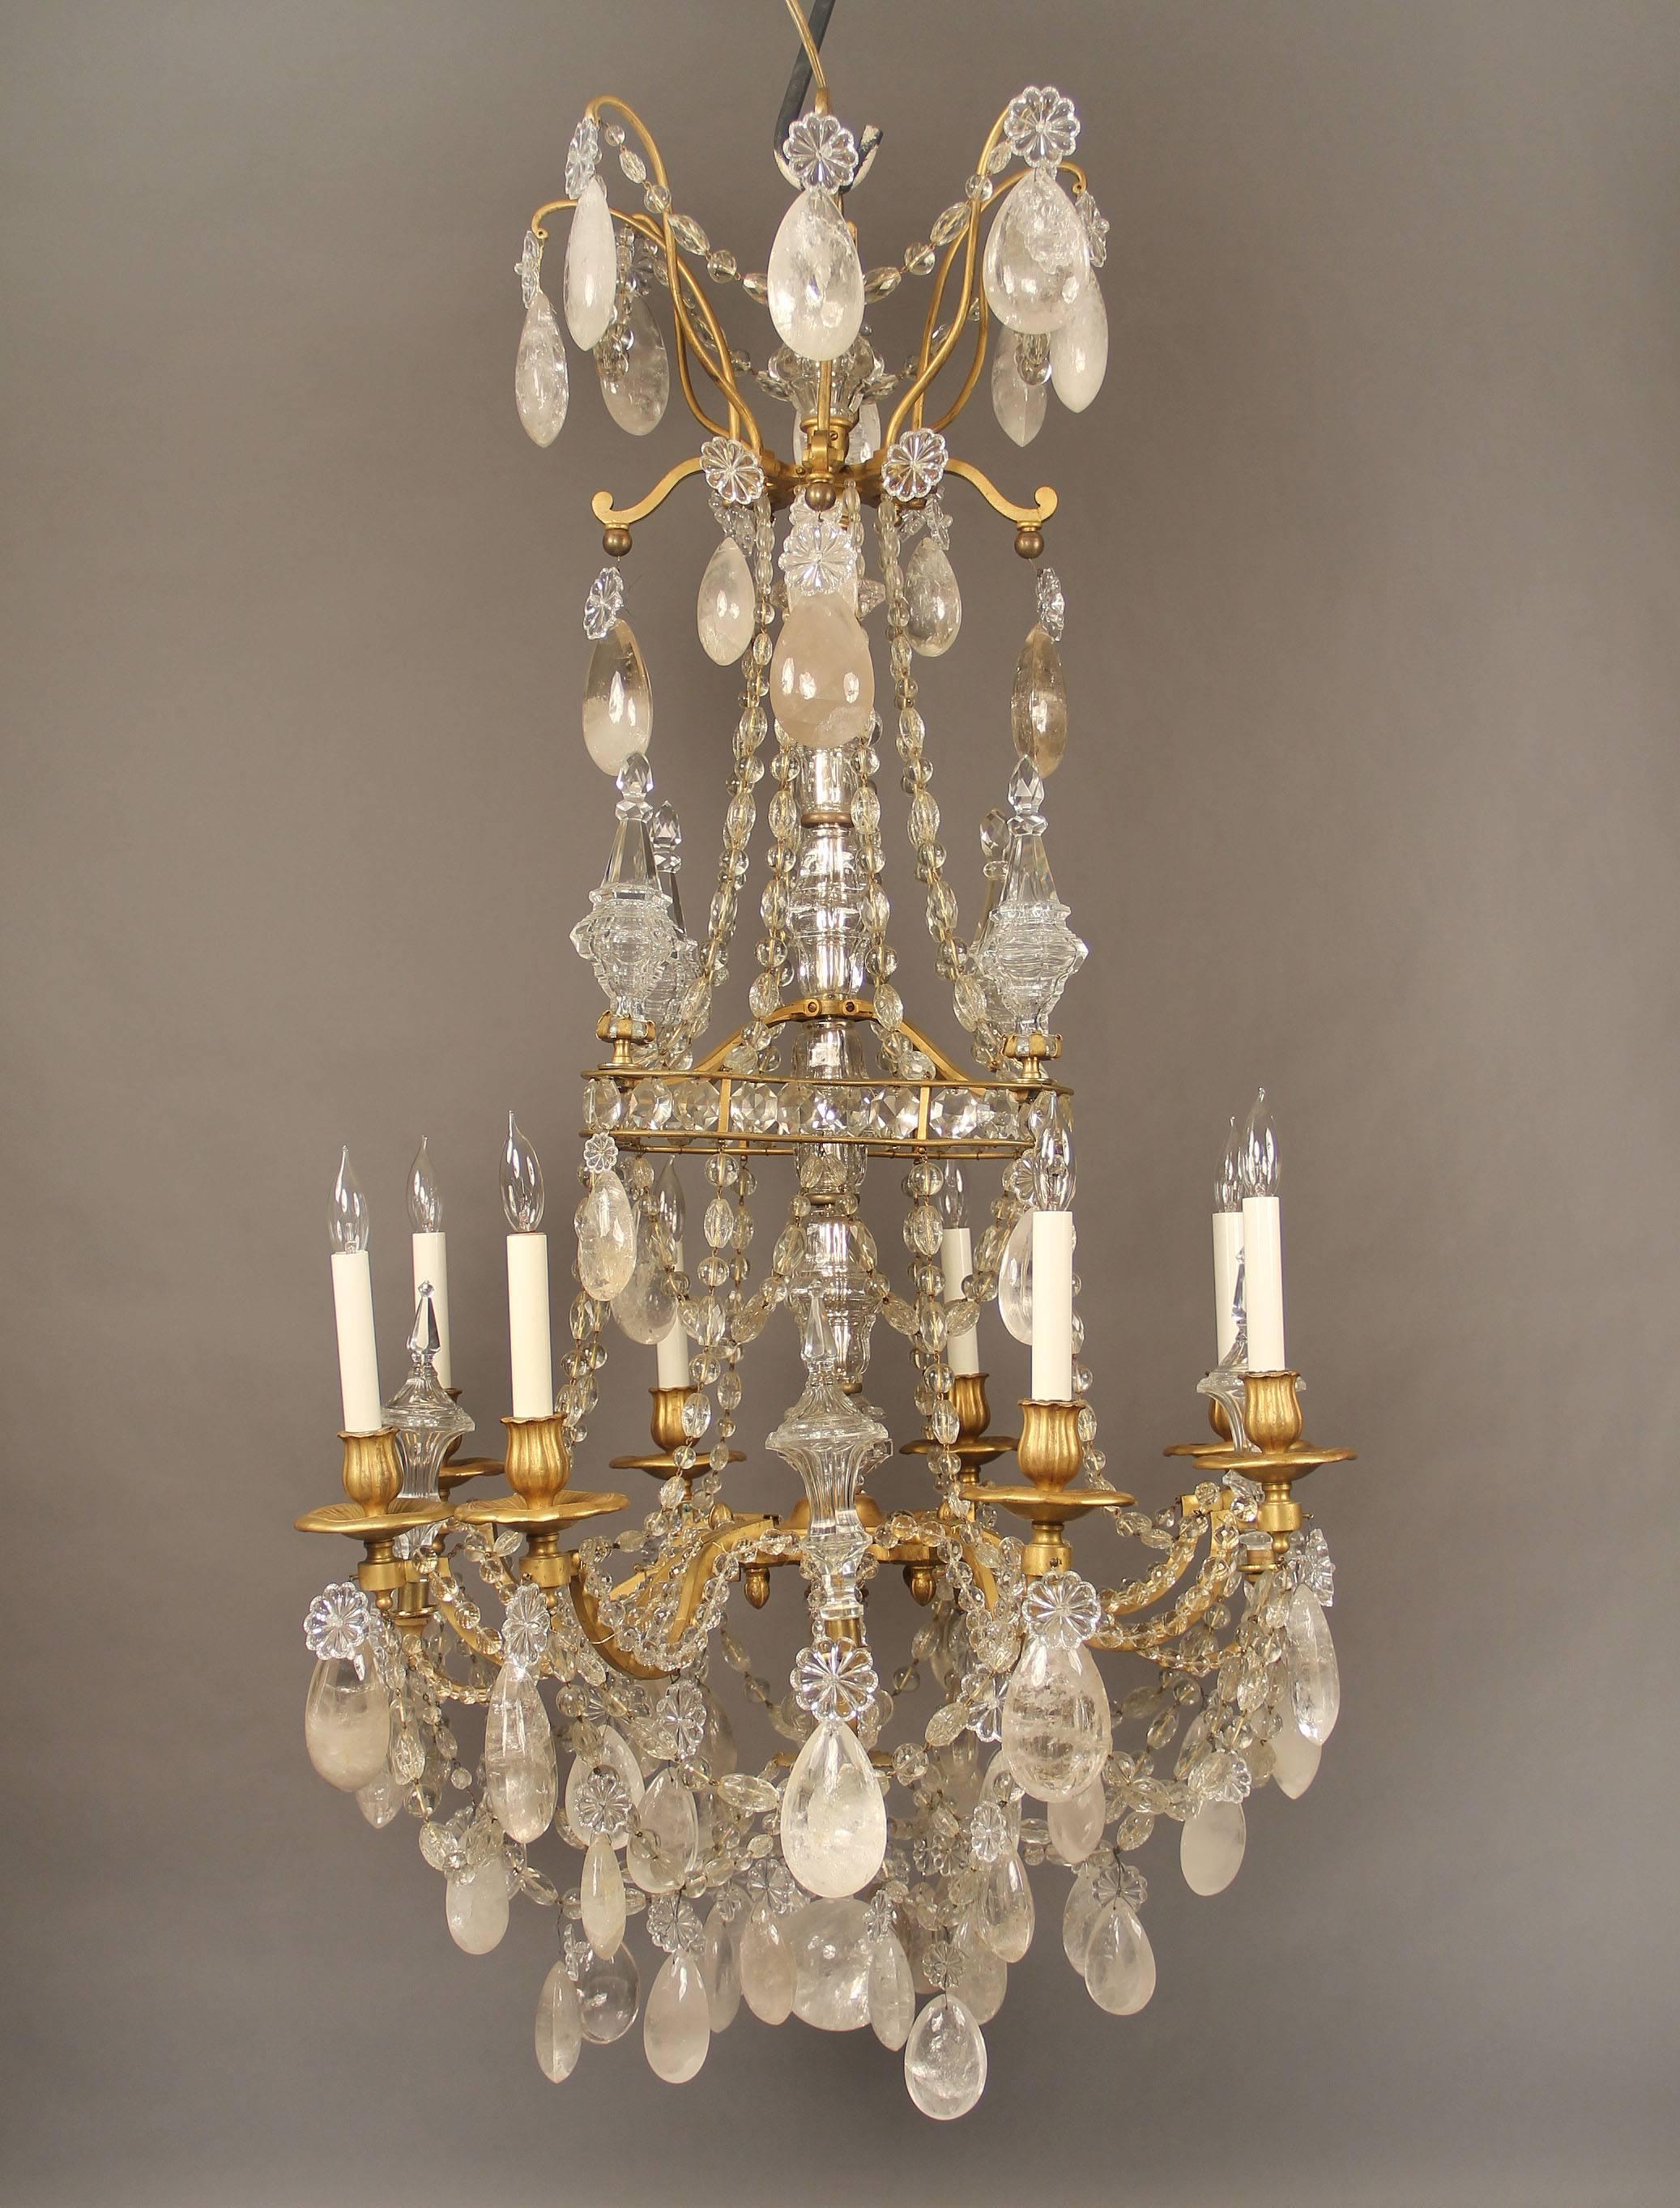 A lovely late 19th century gilt bronze and rock crystal eight-light chandelier.

Attributed to Gagneau Frères.

Full pear shaped and tear drop rock crystal, beaded arms and swags, eight-tiered spears, cut crystal central column.

The